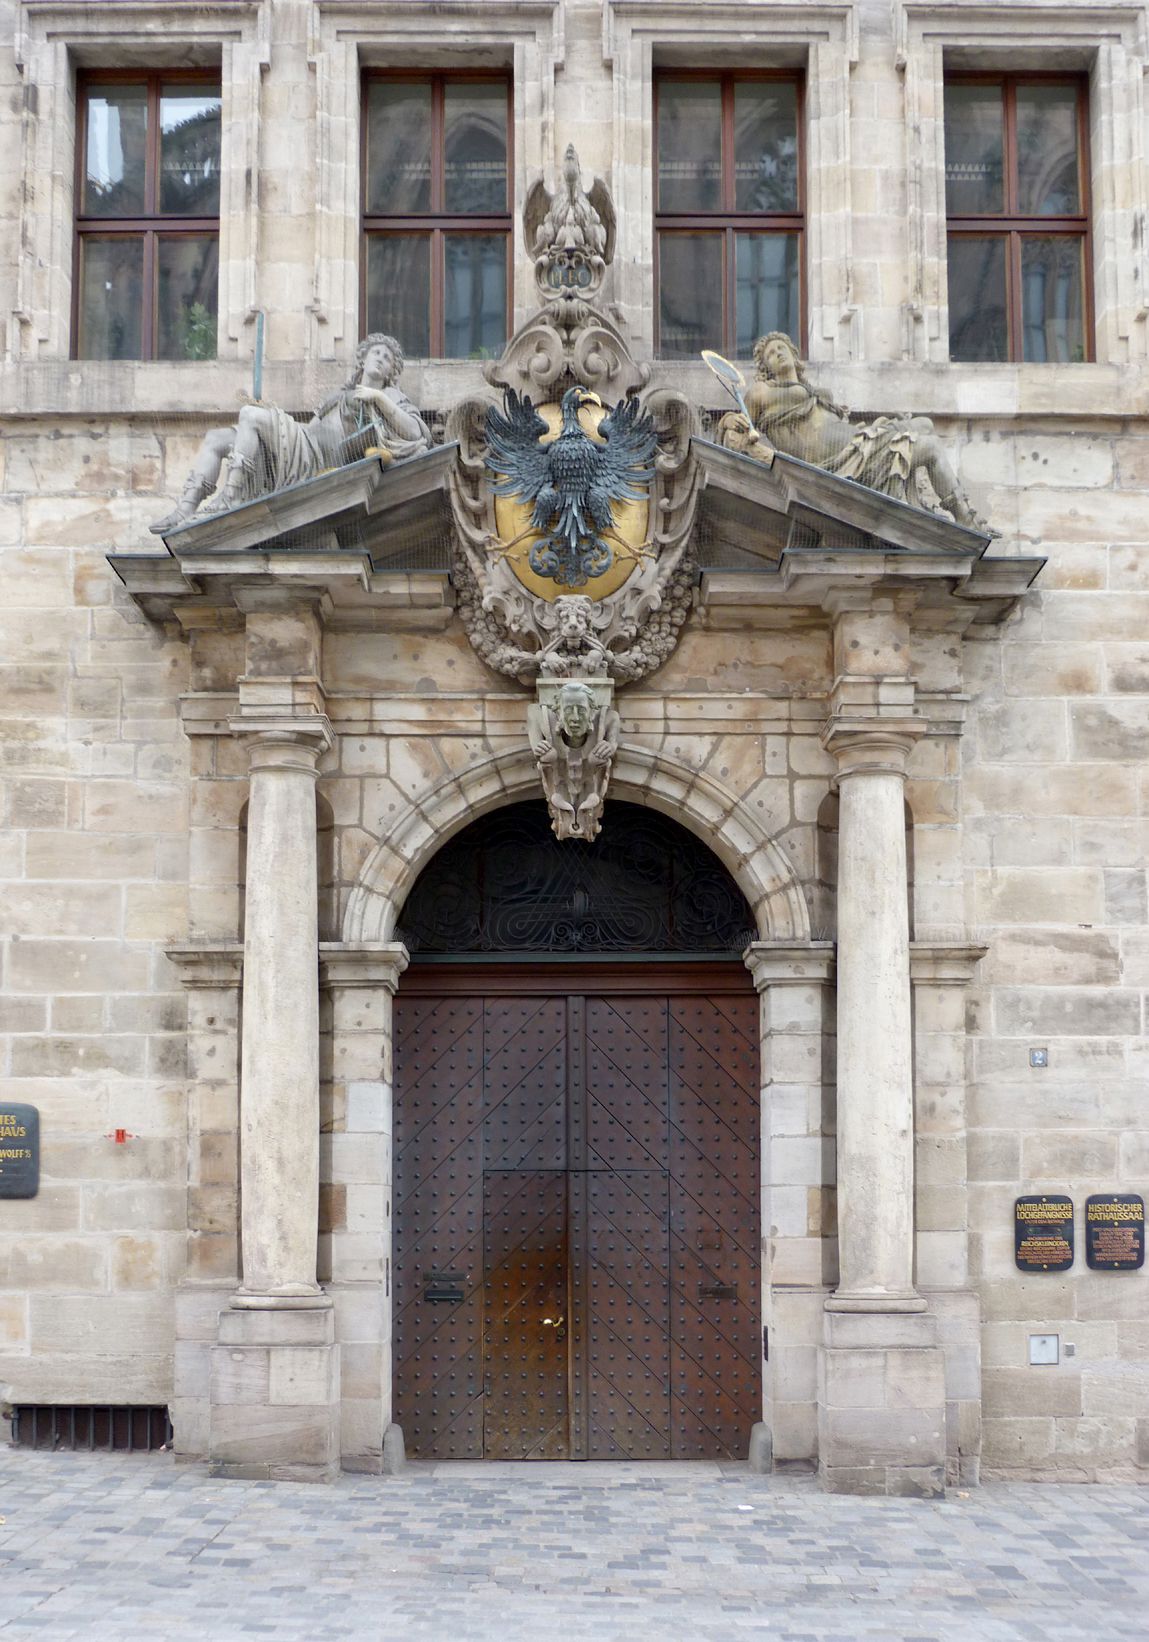 City Hall, Wolff building Central portal